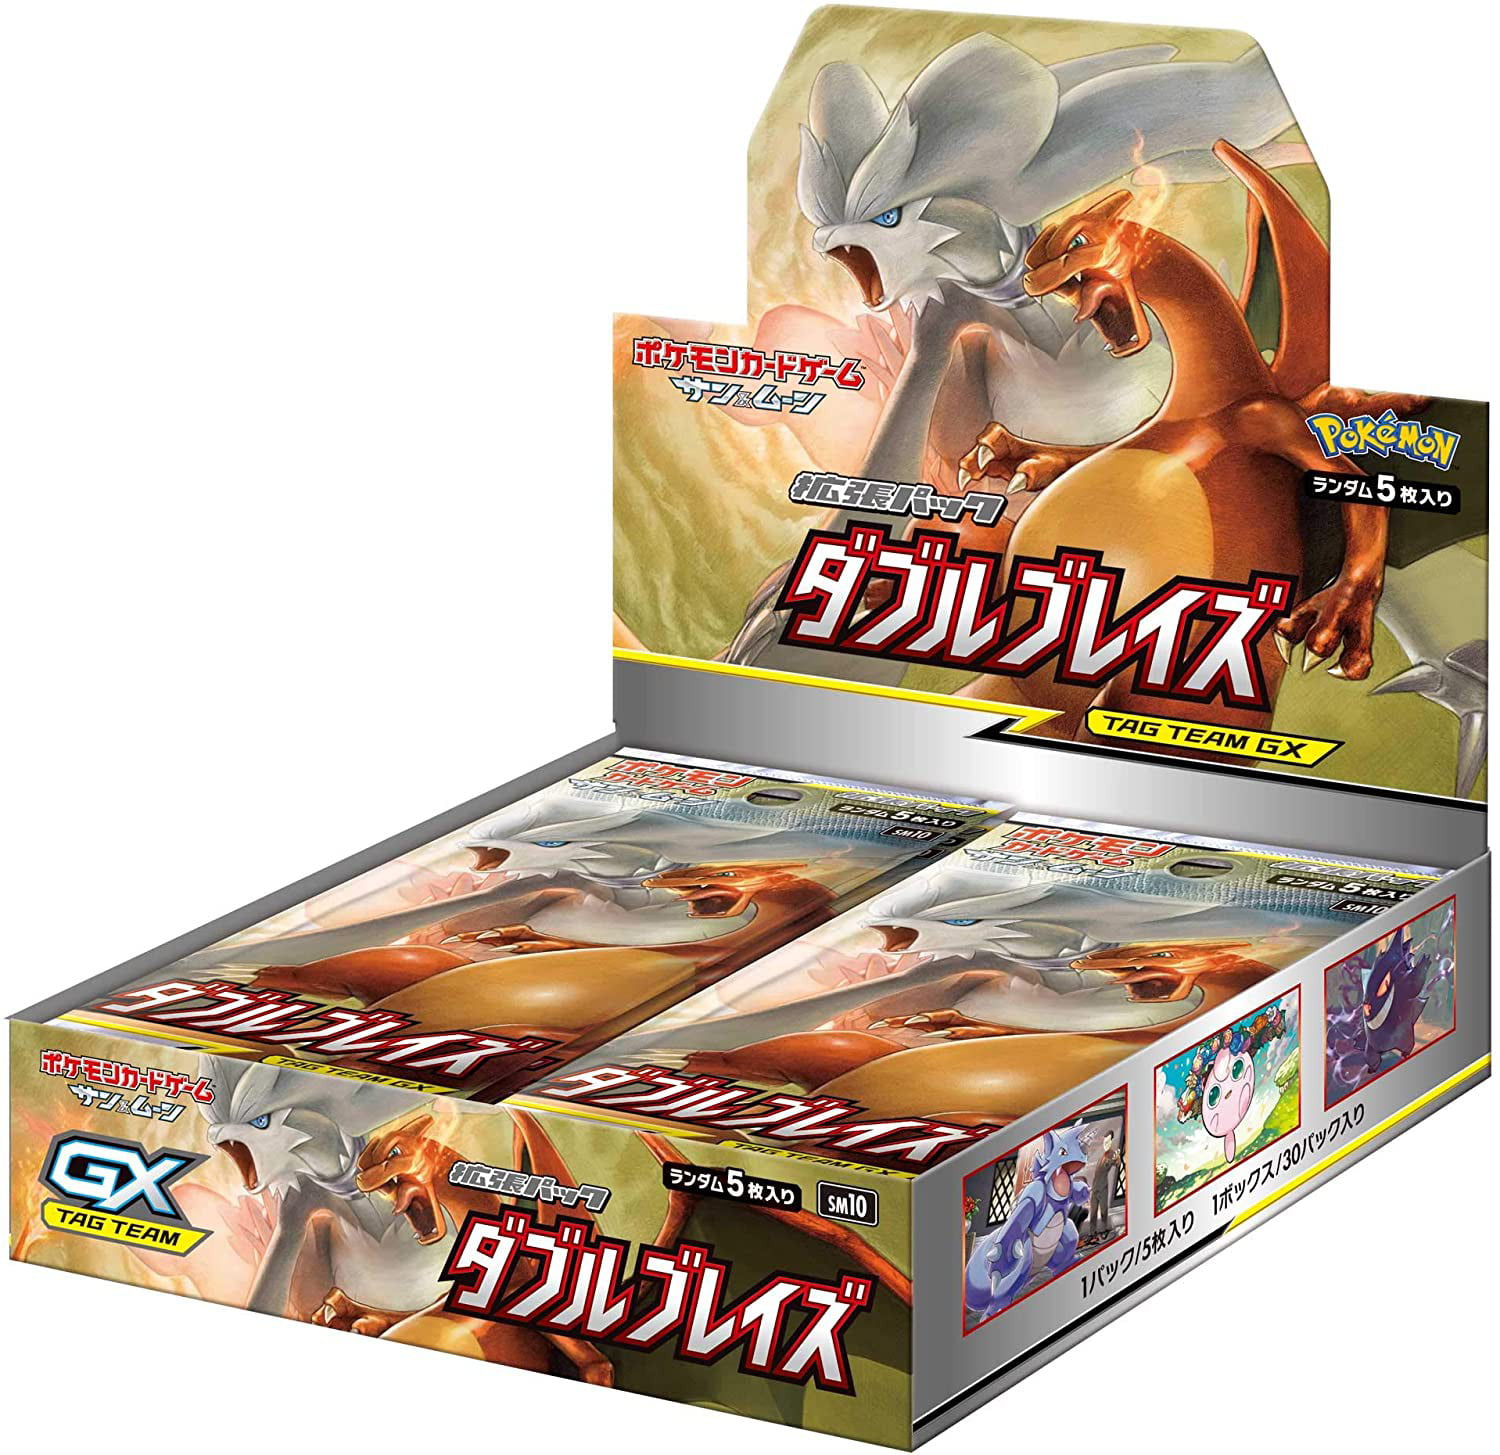 Details about   Pokemon Card Game Sun & Moon Expansion pack GG END G G Booster JAPAN NEW SEALED 